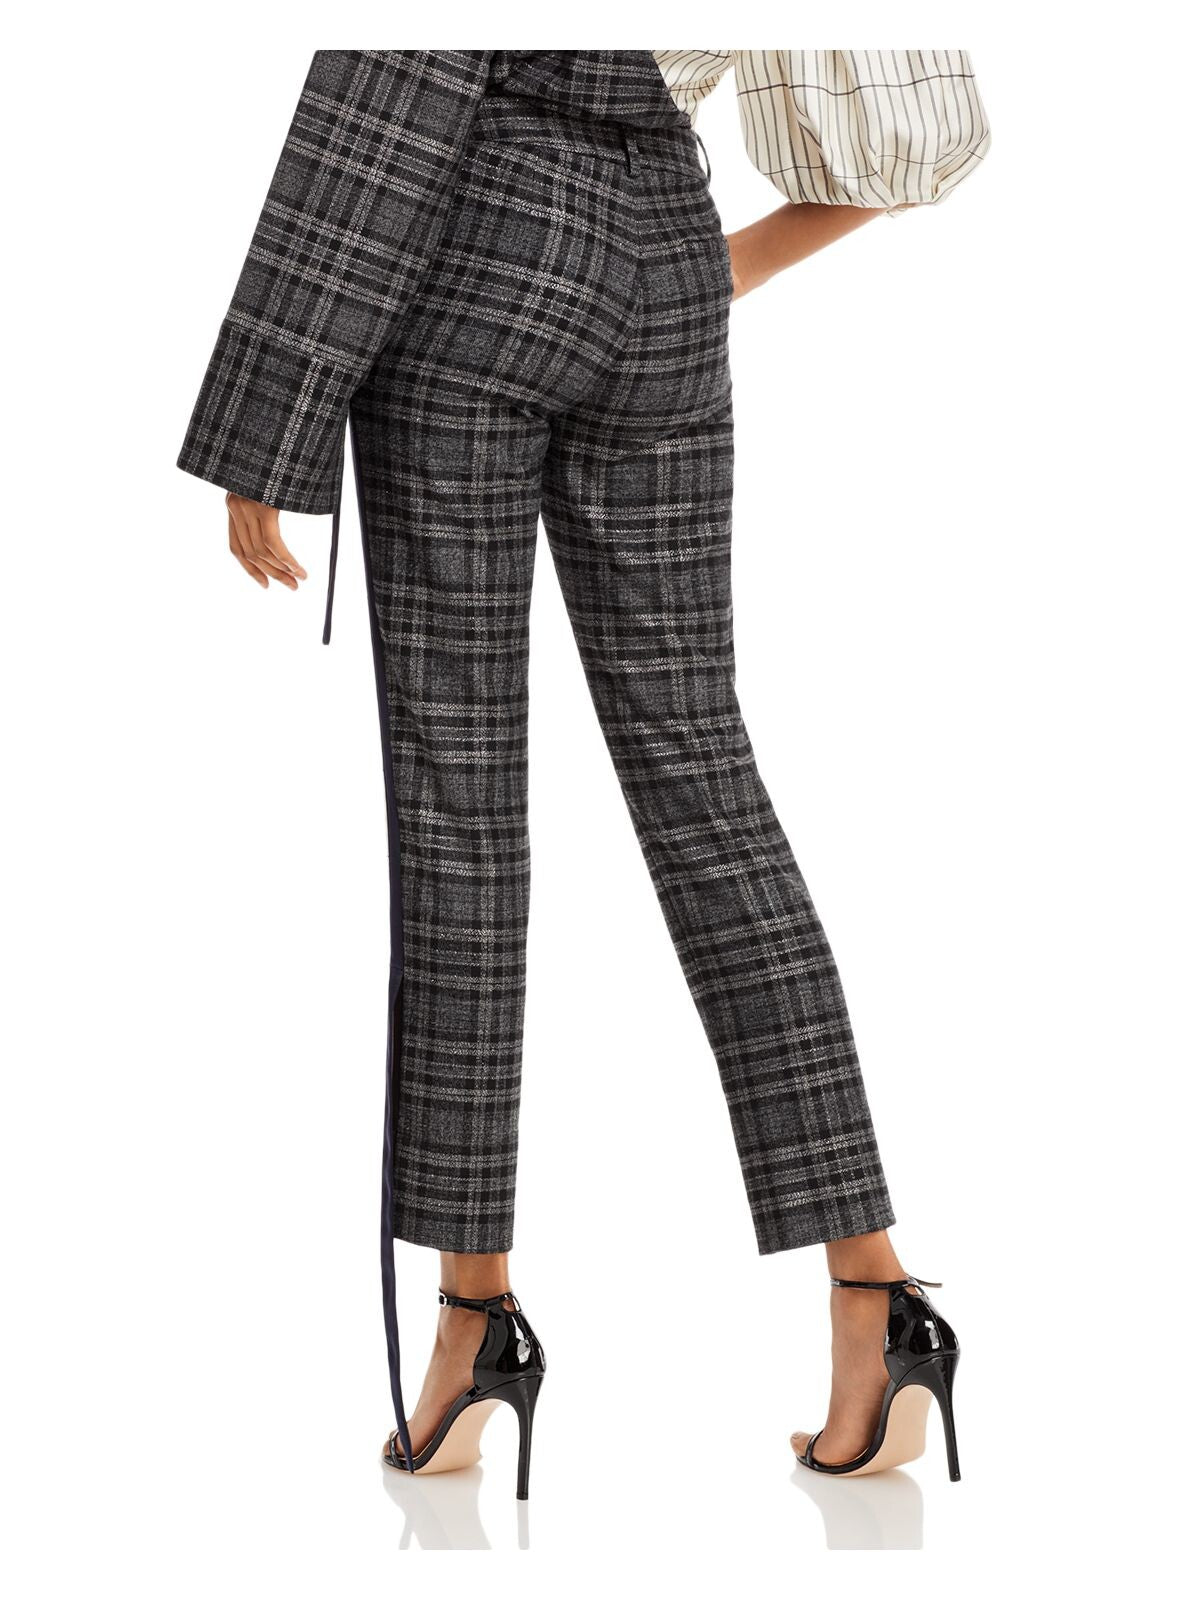 HELLESSY Womens Black Pocketed Zippered Tie Accents Metallic Plaid Straight leg Pants 8